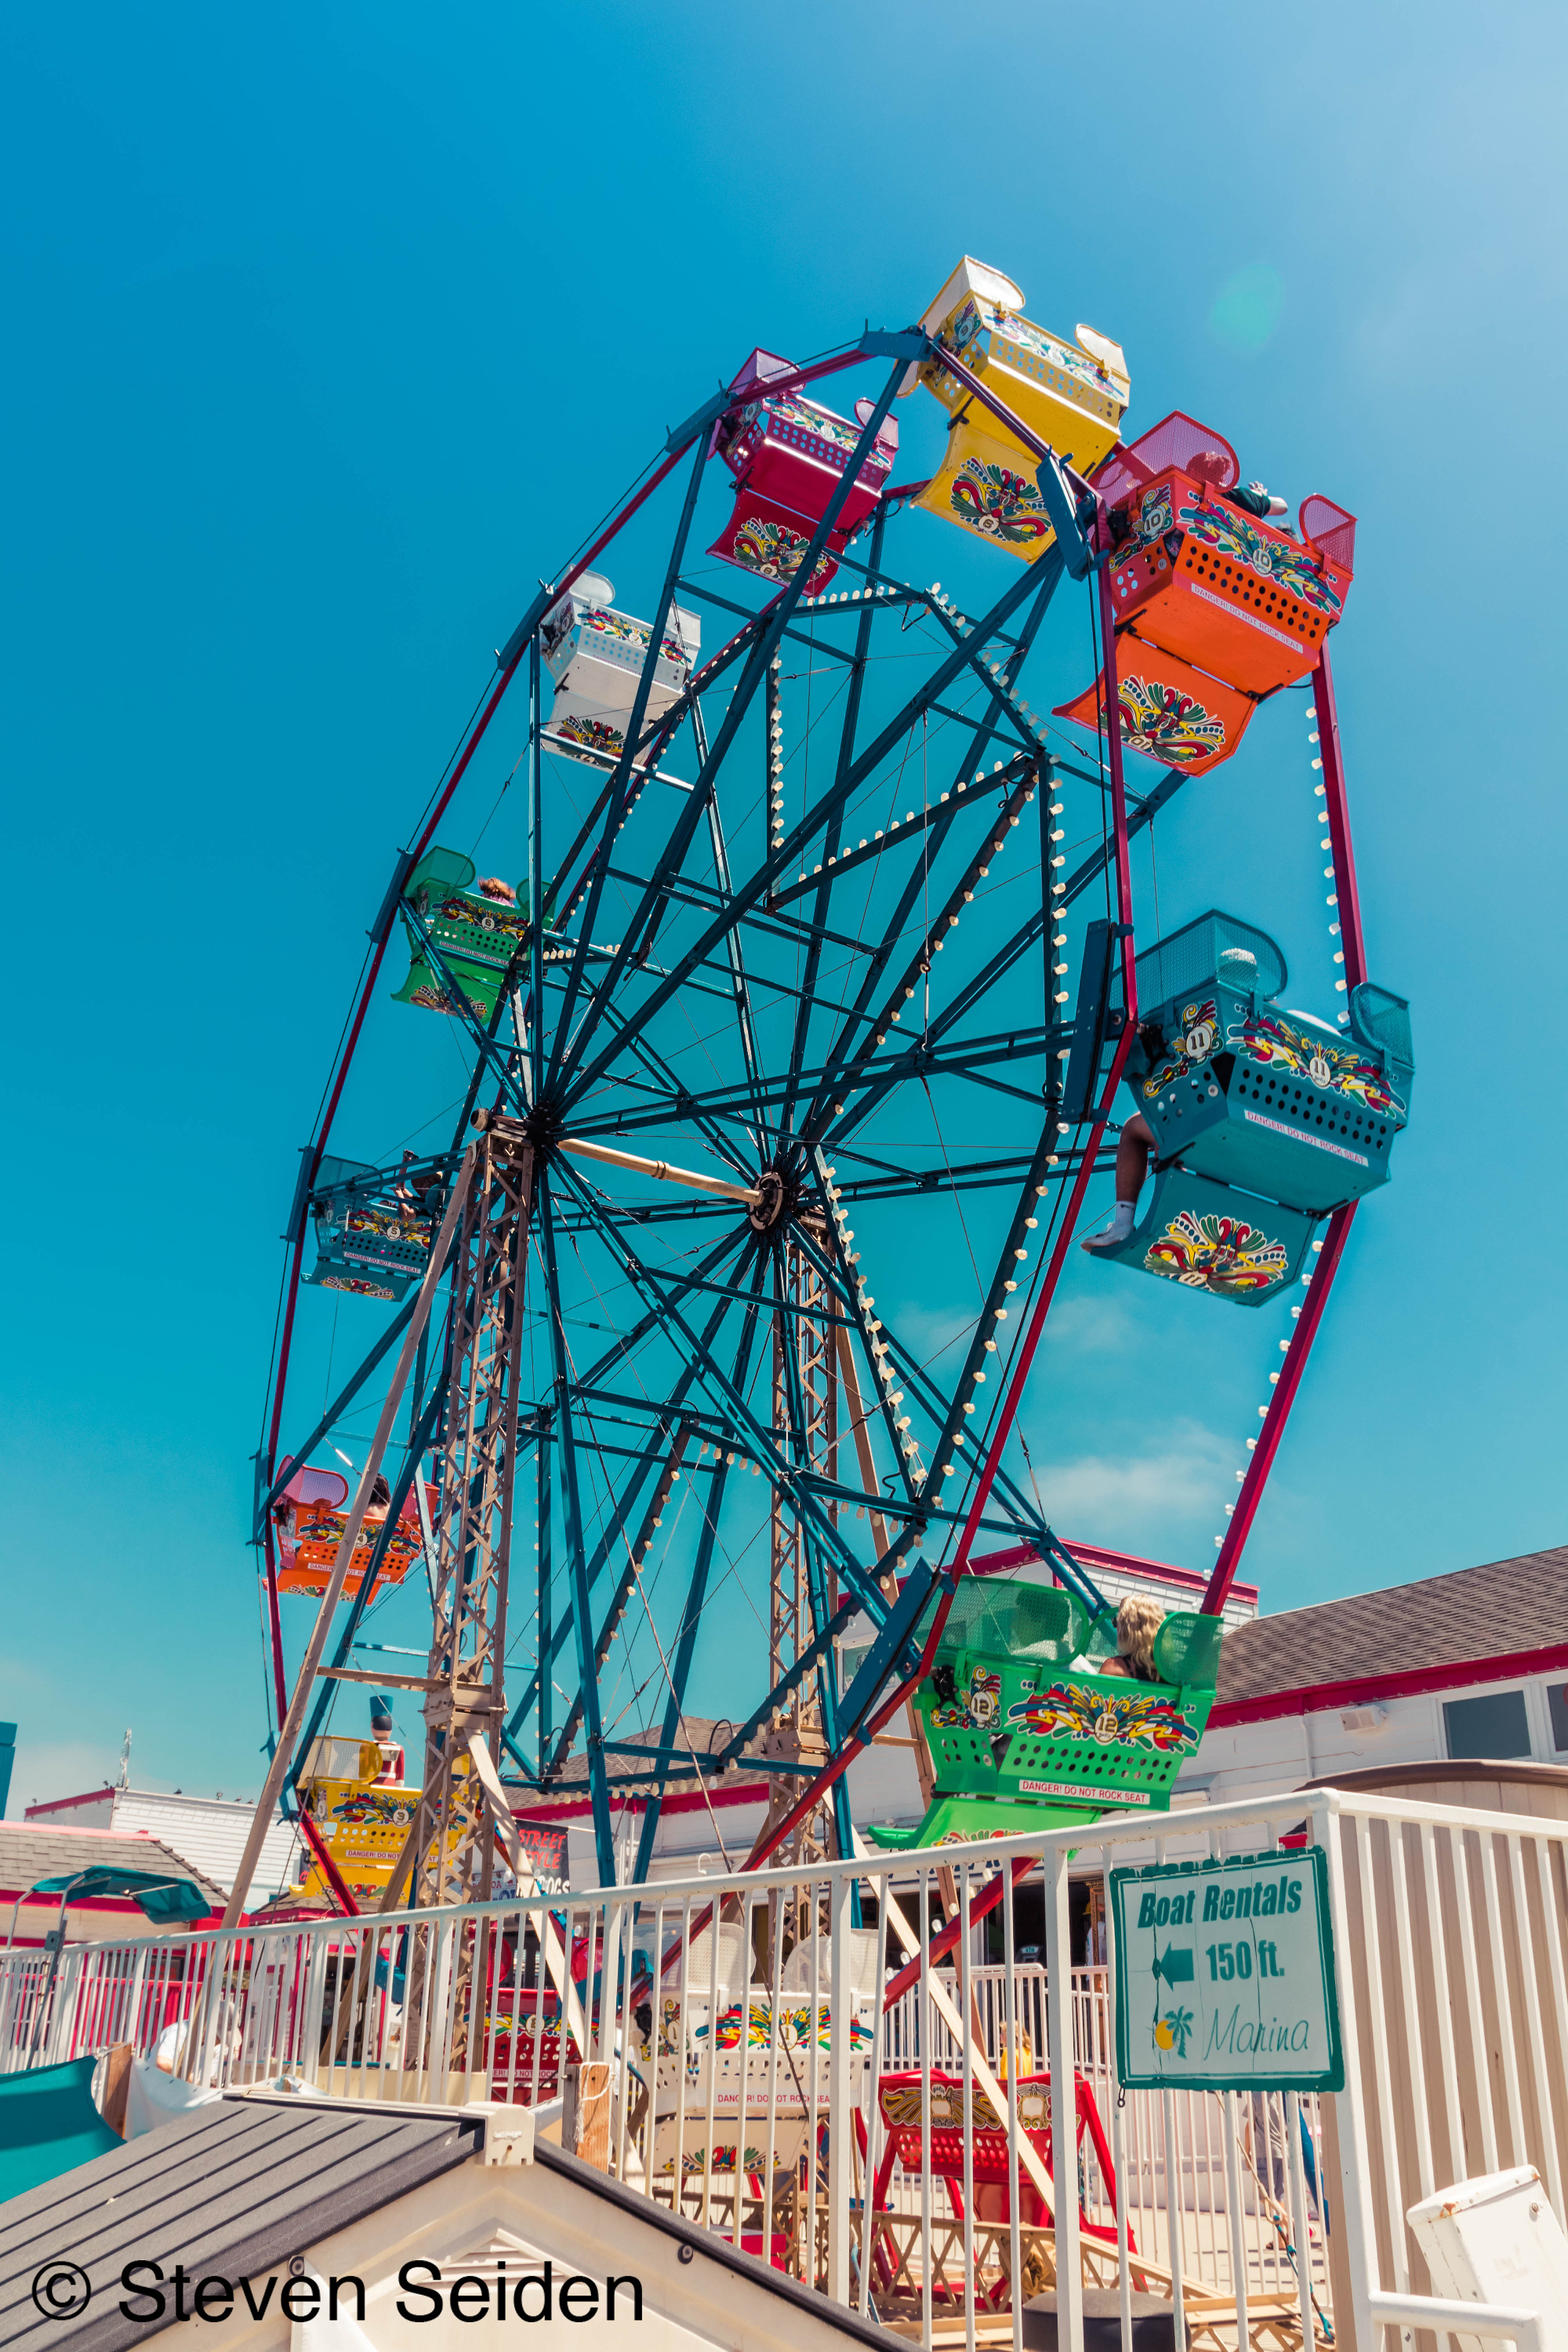 A picture of a ferris wheel.